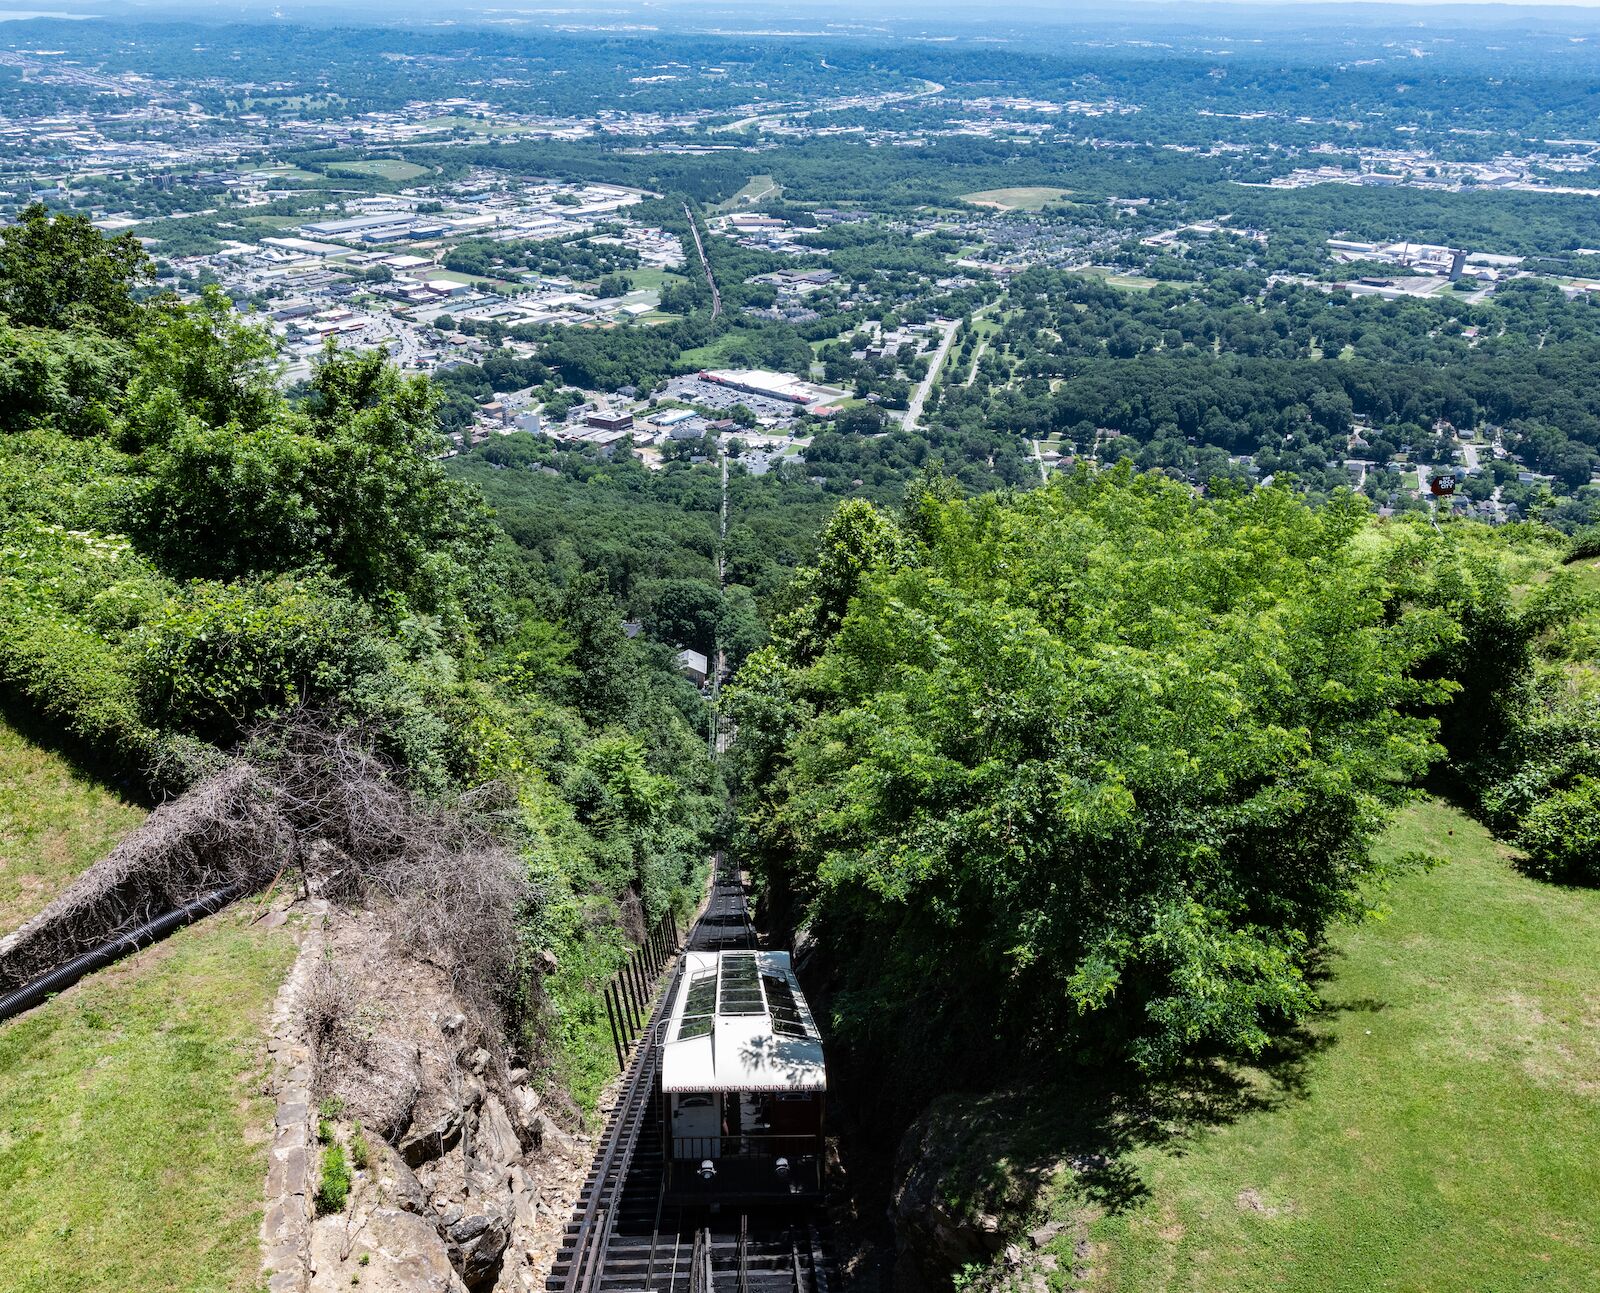 Chattanooga, Tennessee/ USA - June 6, 2018: Panoramic view of The Incline on Lookout Mountain looking down into the Tennessee River Valley. Built in 1895, this railway claims to be world's steepest.